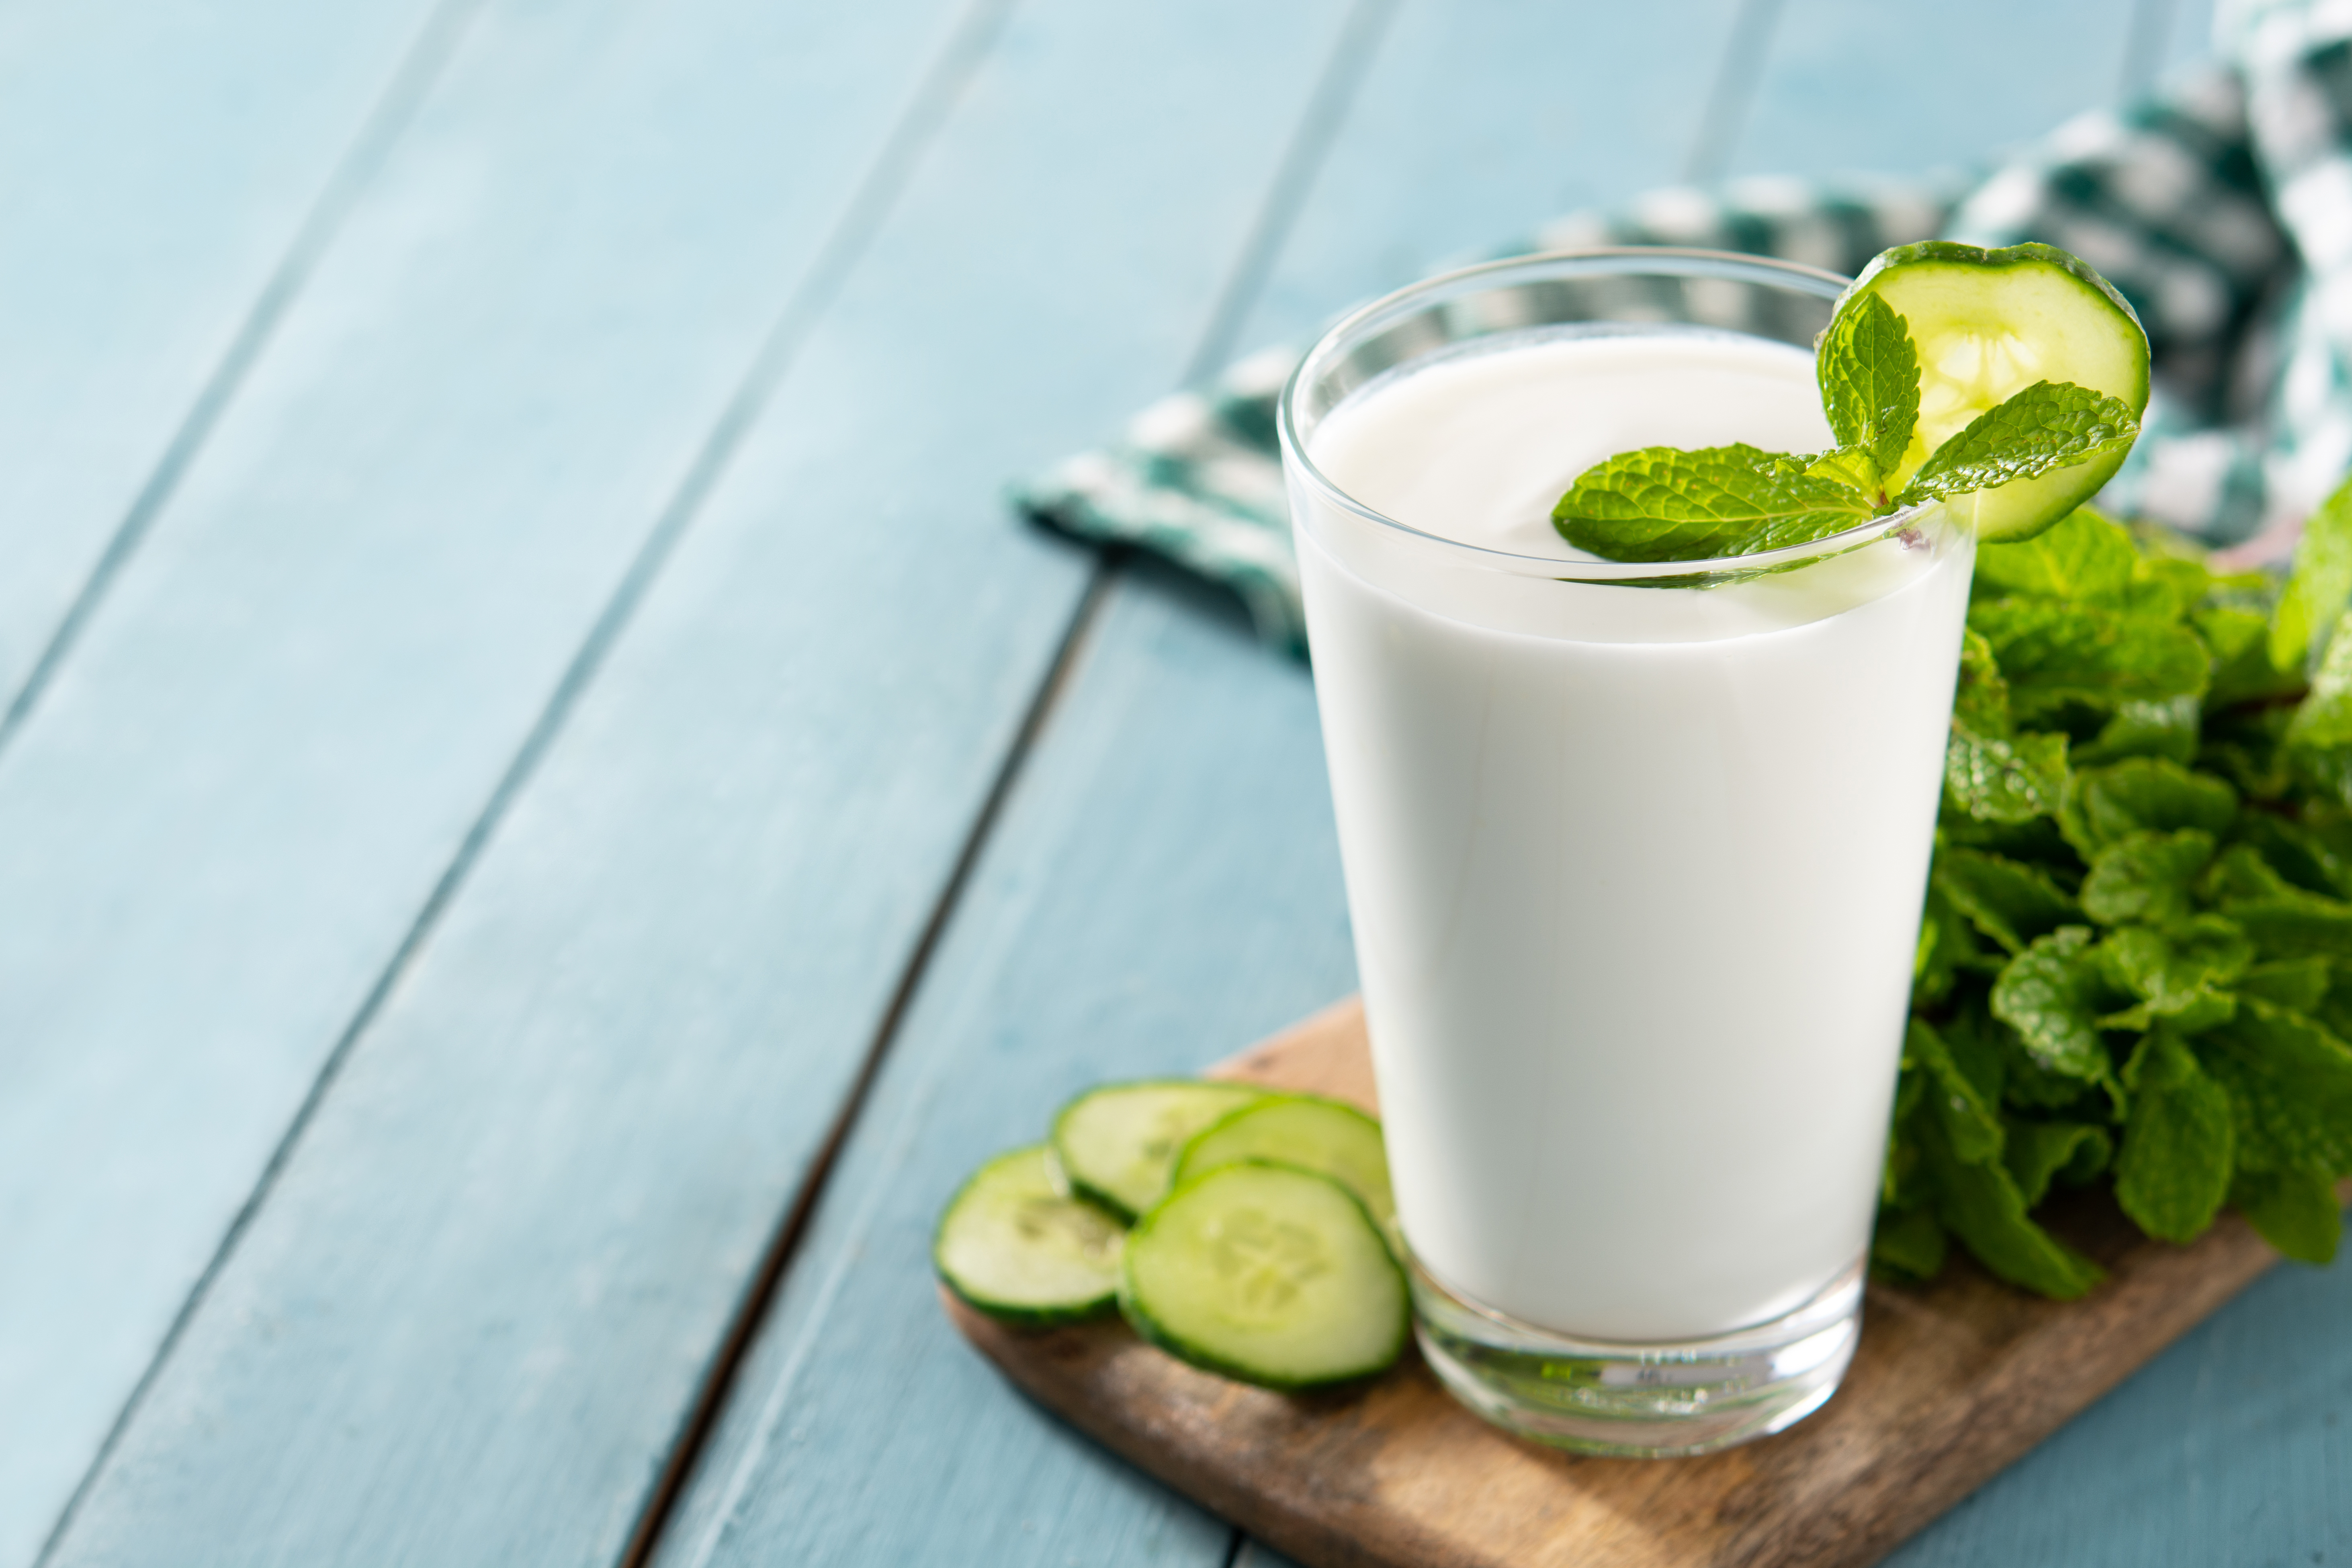 How is Buttermilk good for acid reflux?